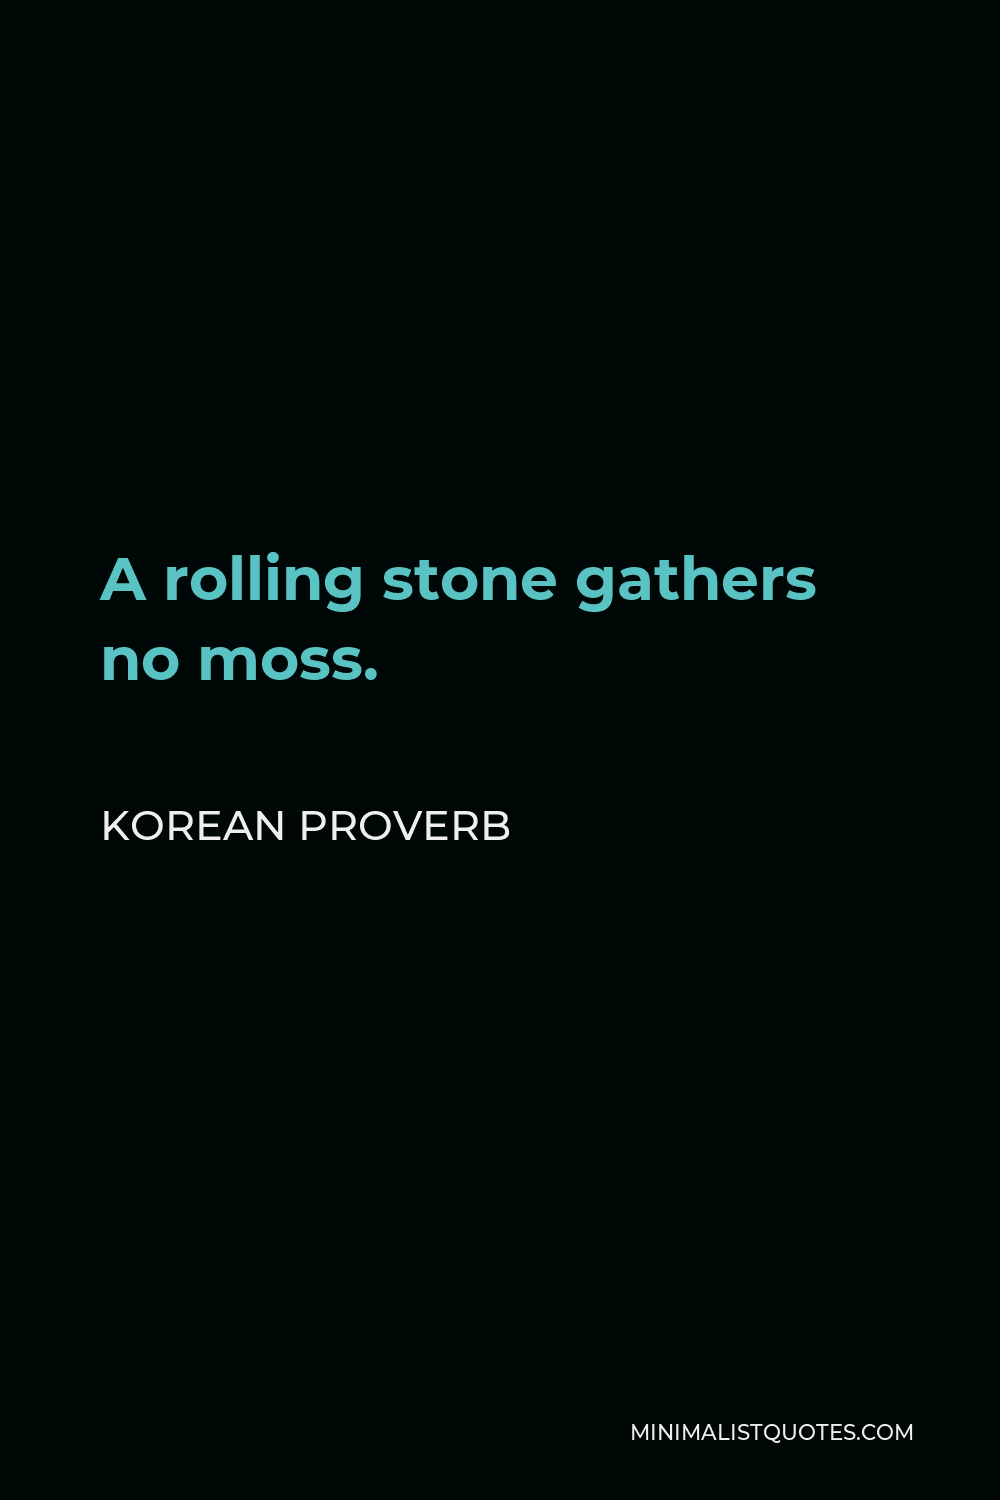 Korean Proverb Quote - A rolling stone gathers no moss.